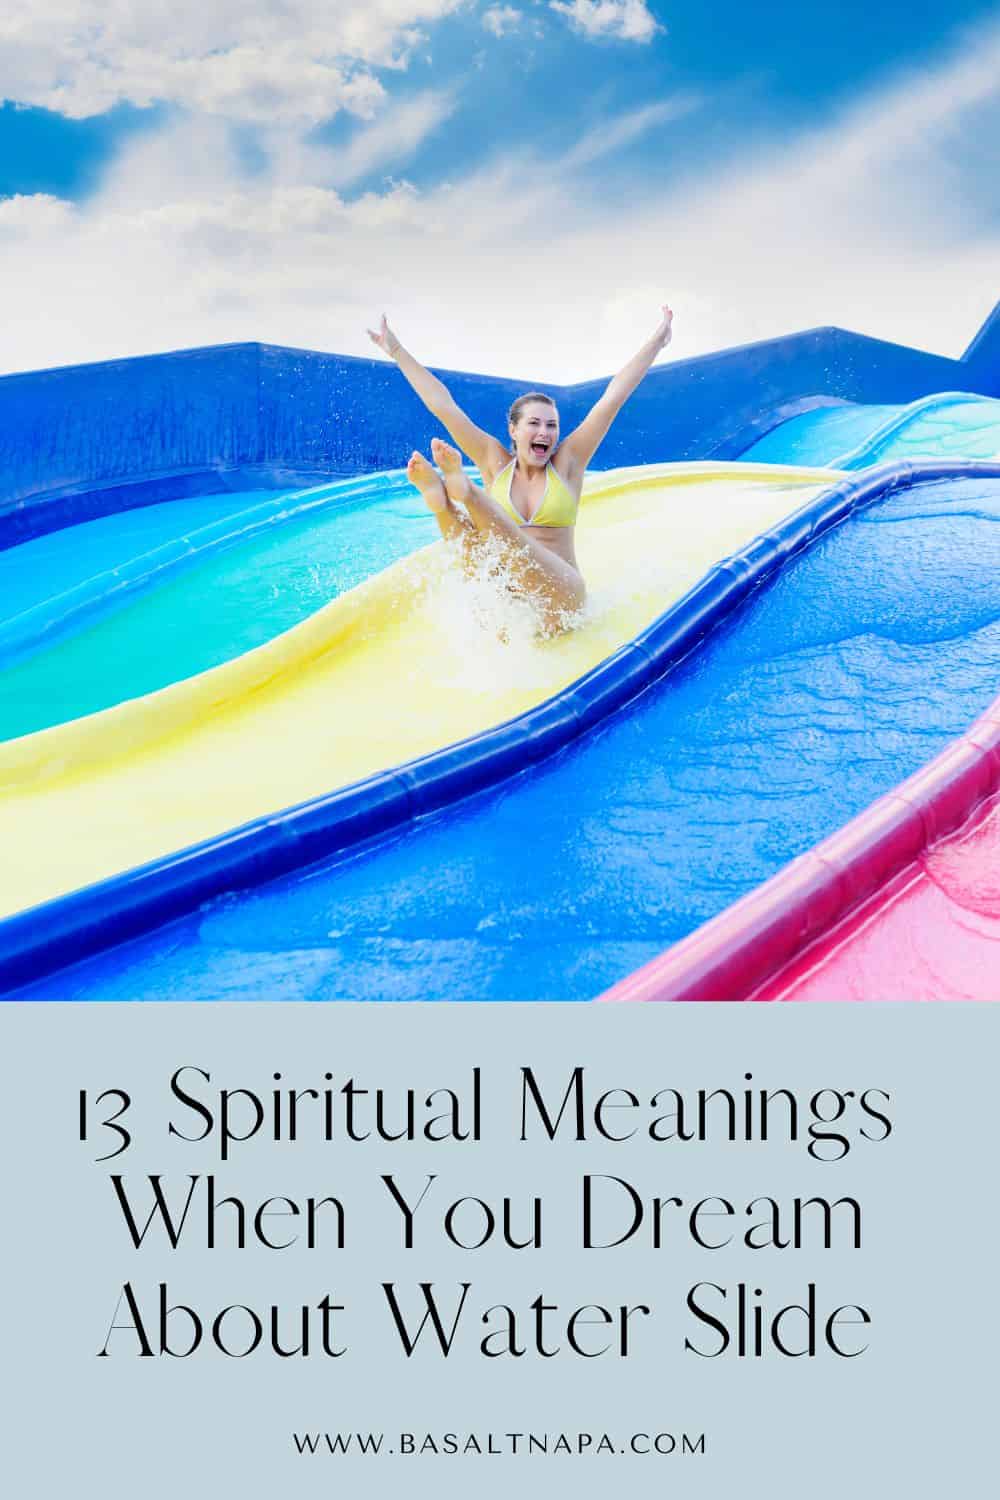 13 Spiritual Meanings When You Dream About Water Slide